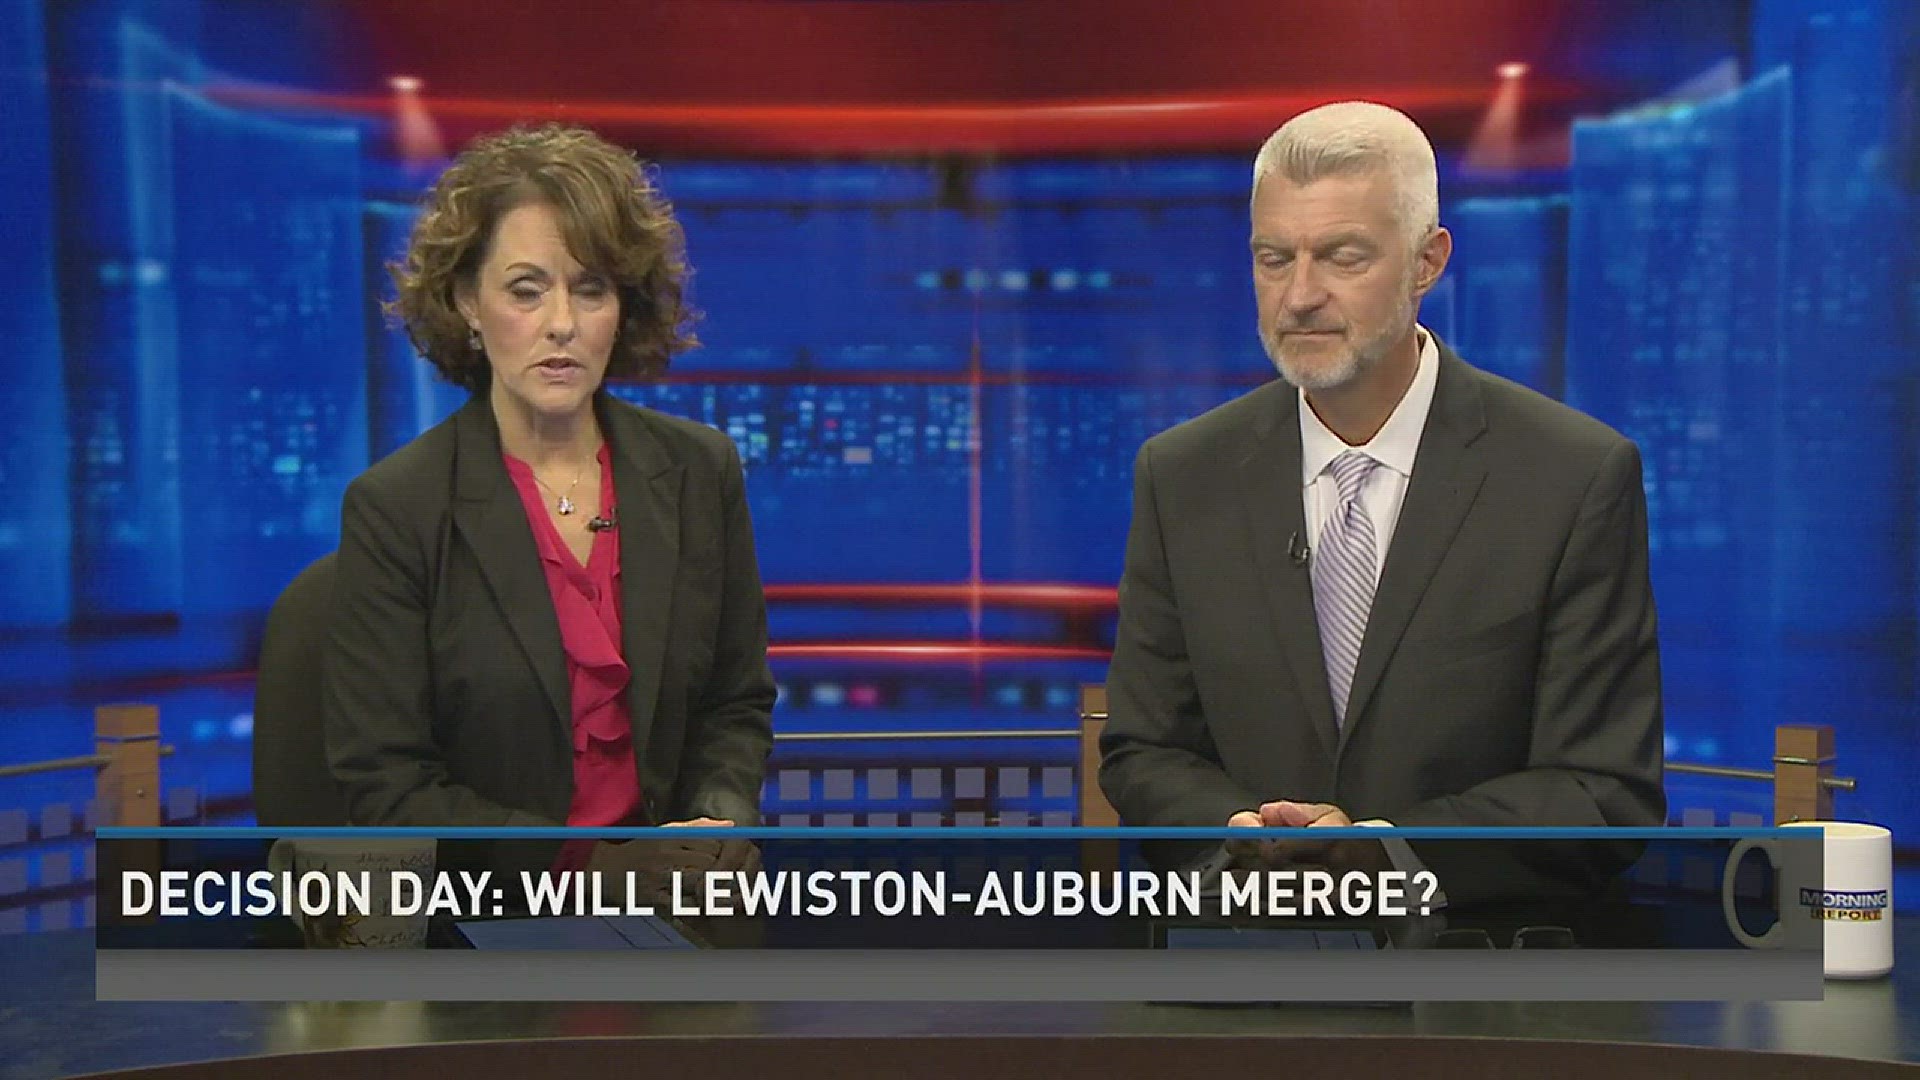 As polls open to let voters decide on a proposal to merge the cities of Lewiston and Auburn, NEWS CENTER's Zach Blanchard talks to leaders on both sides of the issue